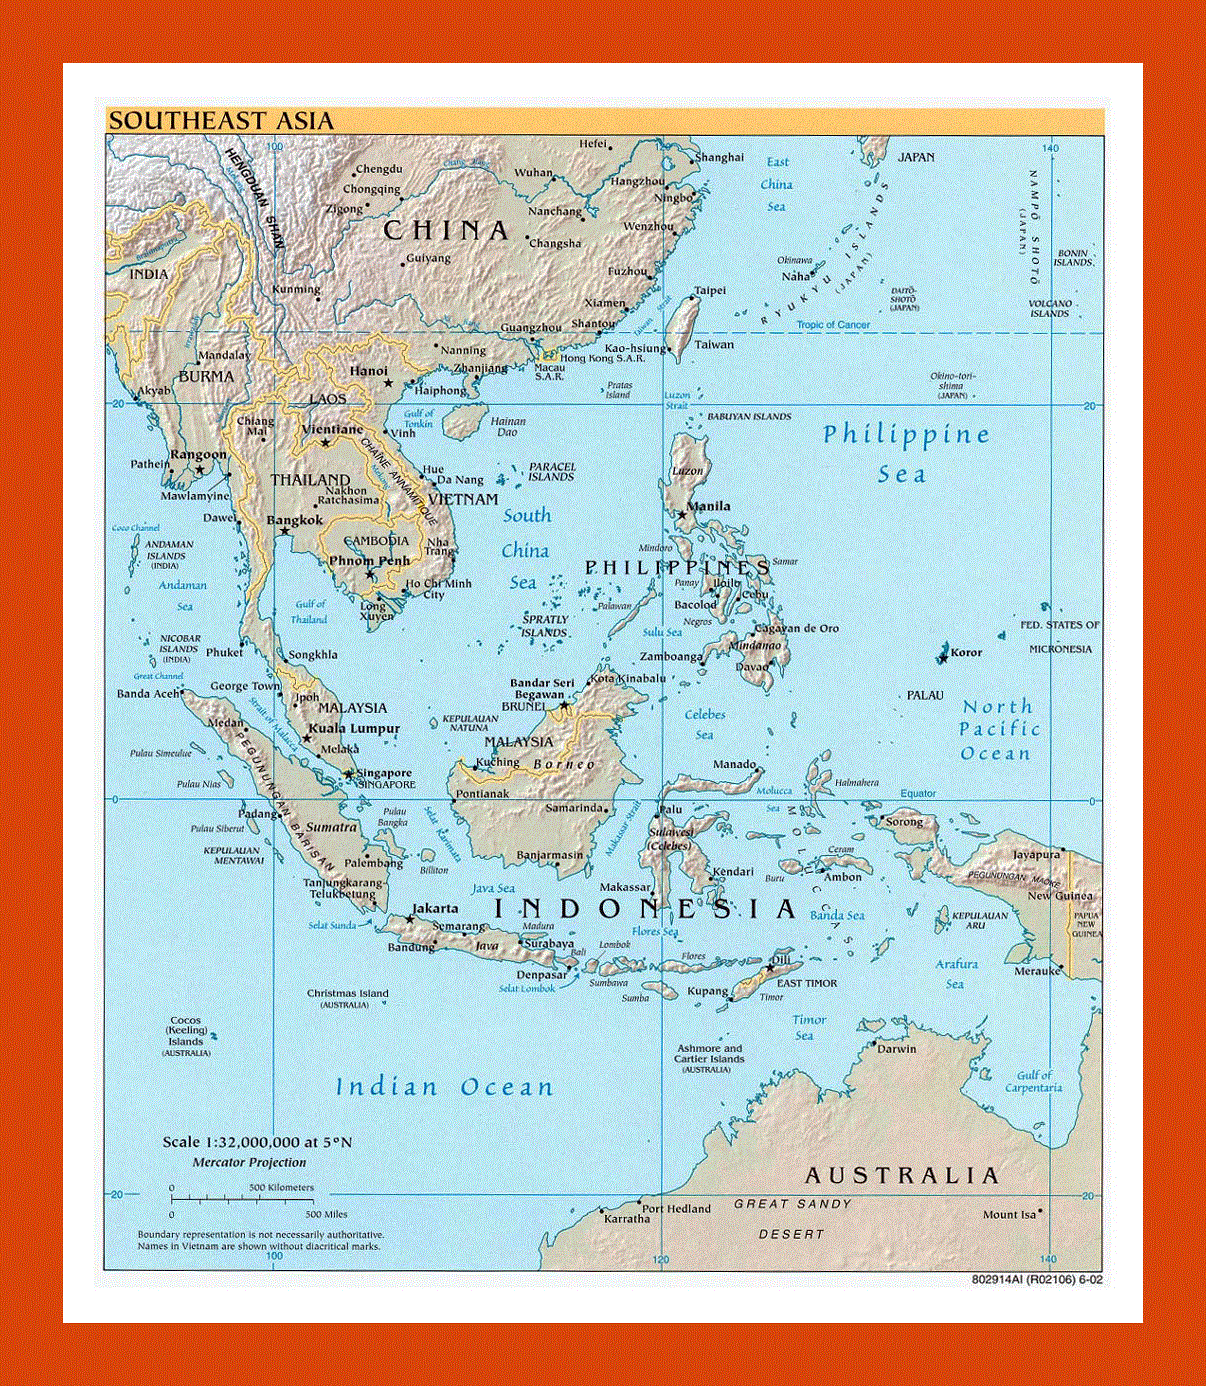 Political map of Southeast Asia - 2002